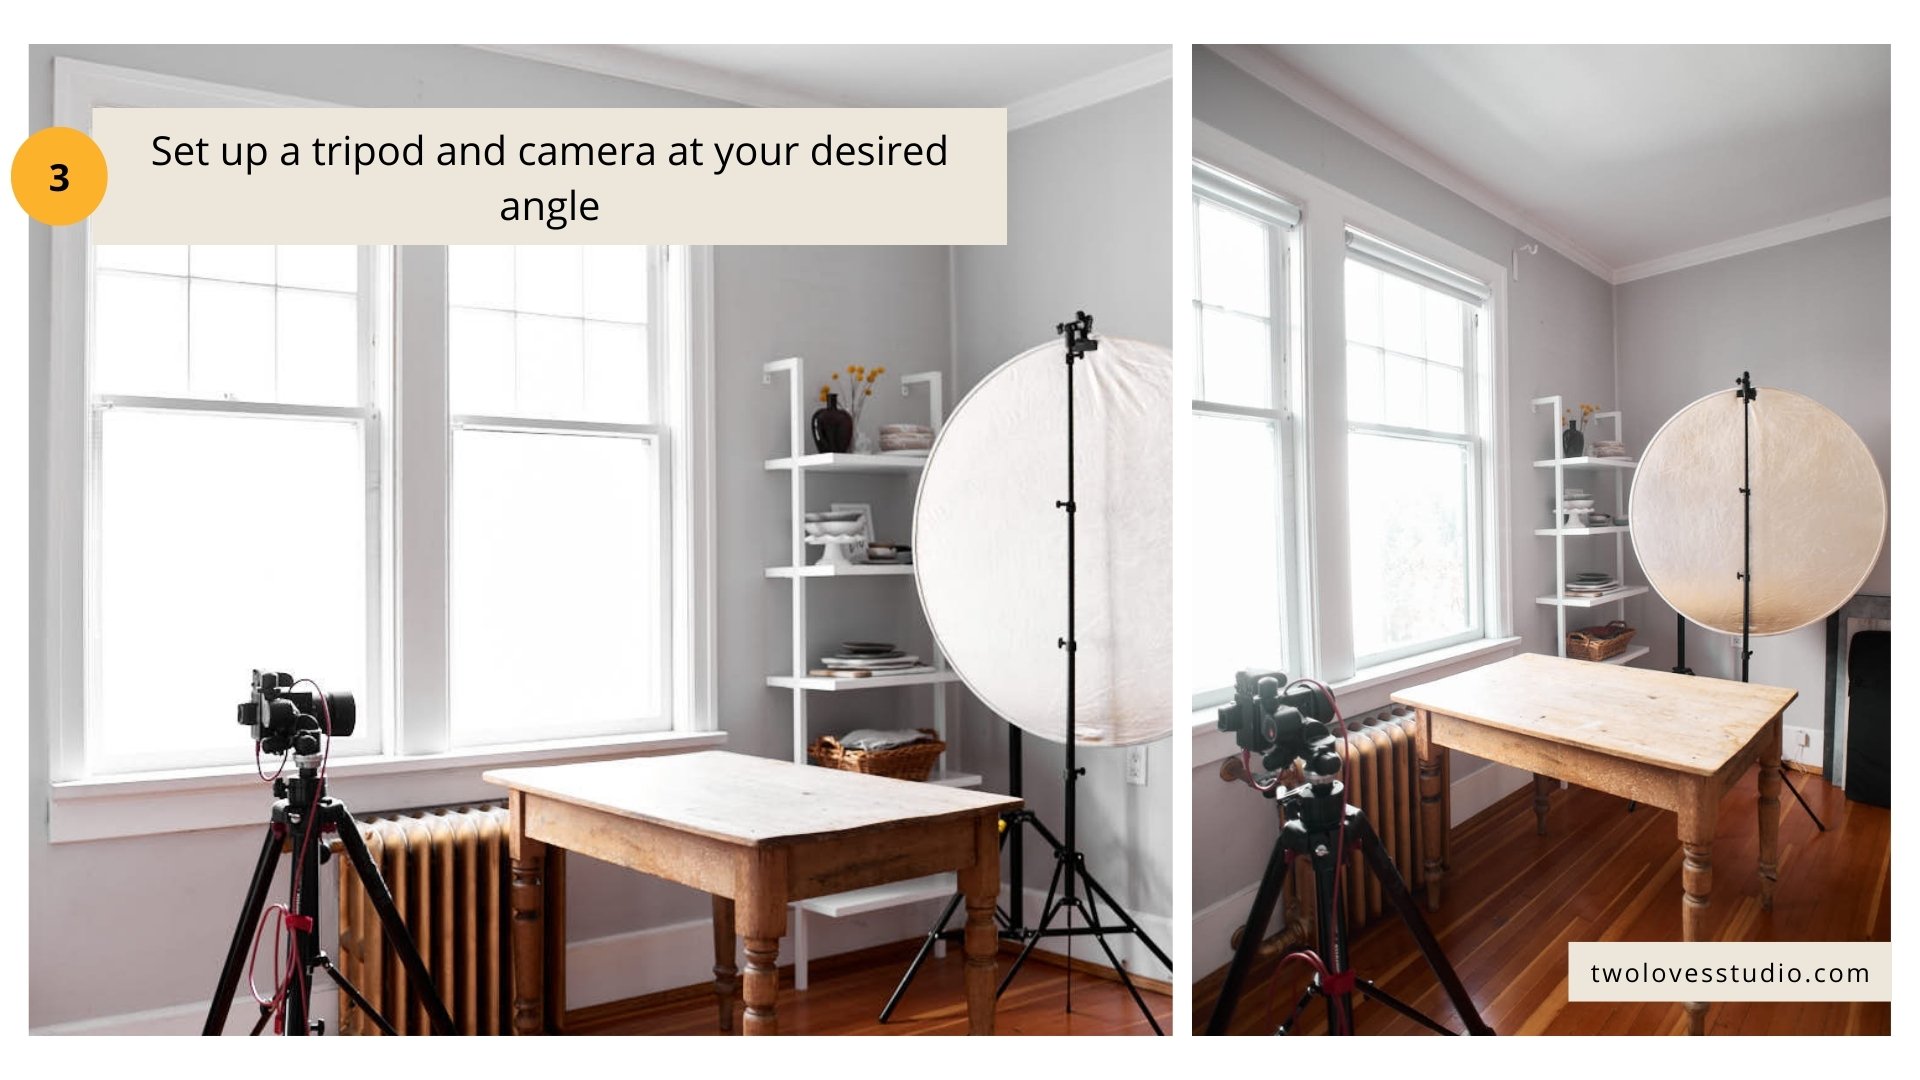 Behind the scenes of a home photography studio. With step by step instructions on how to setup a photoshoot.